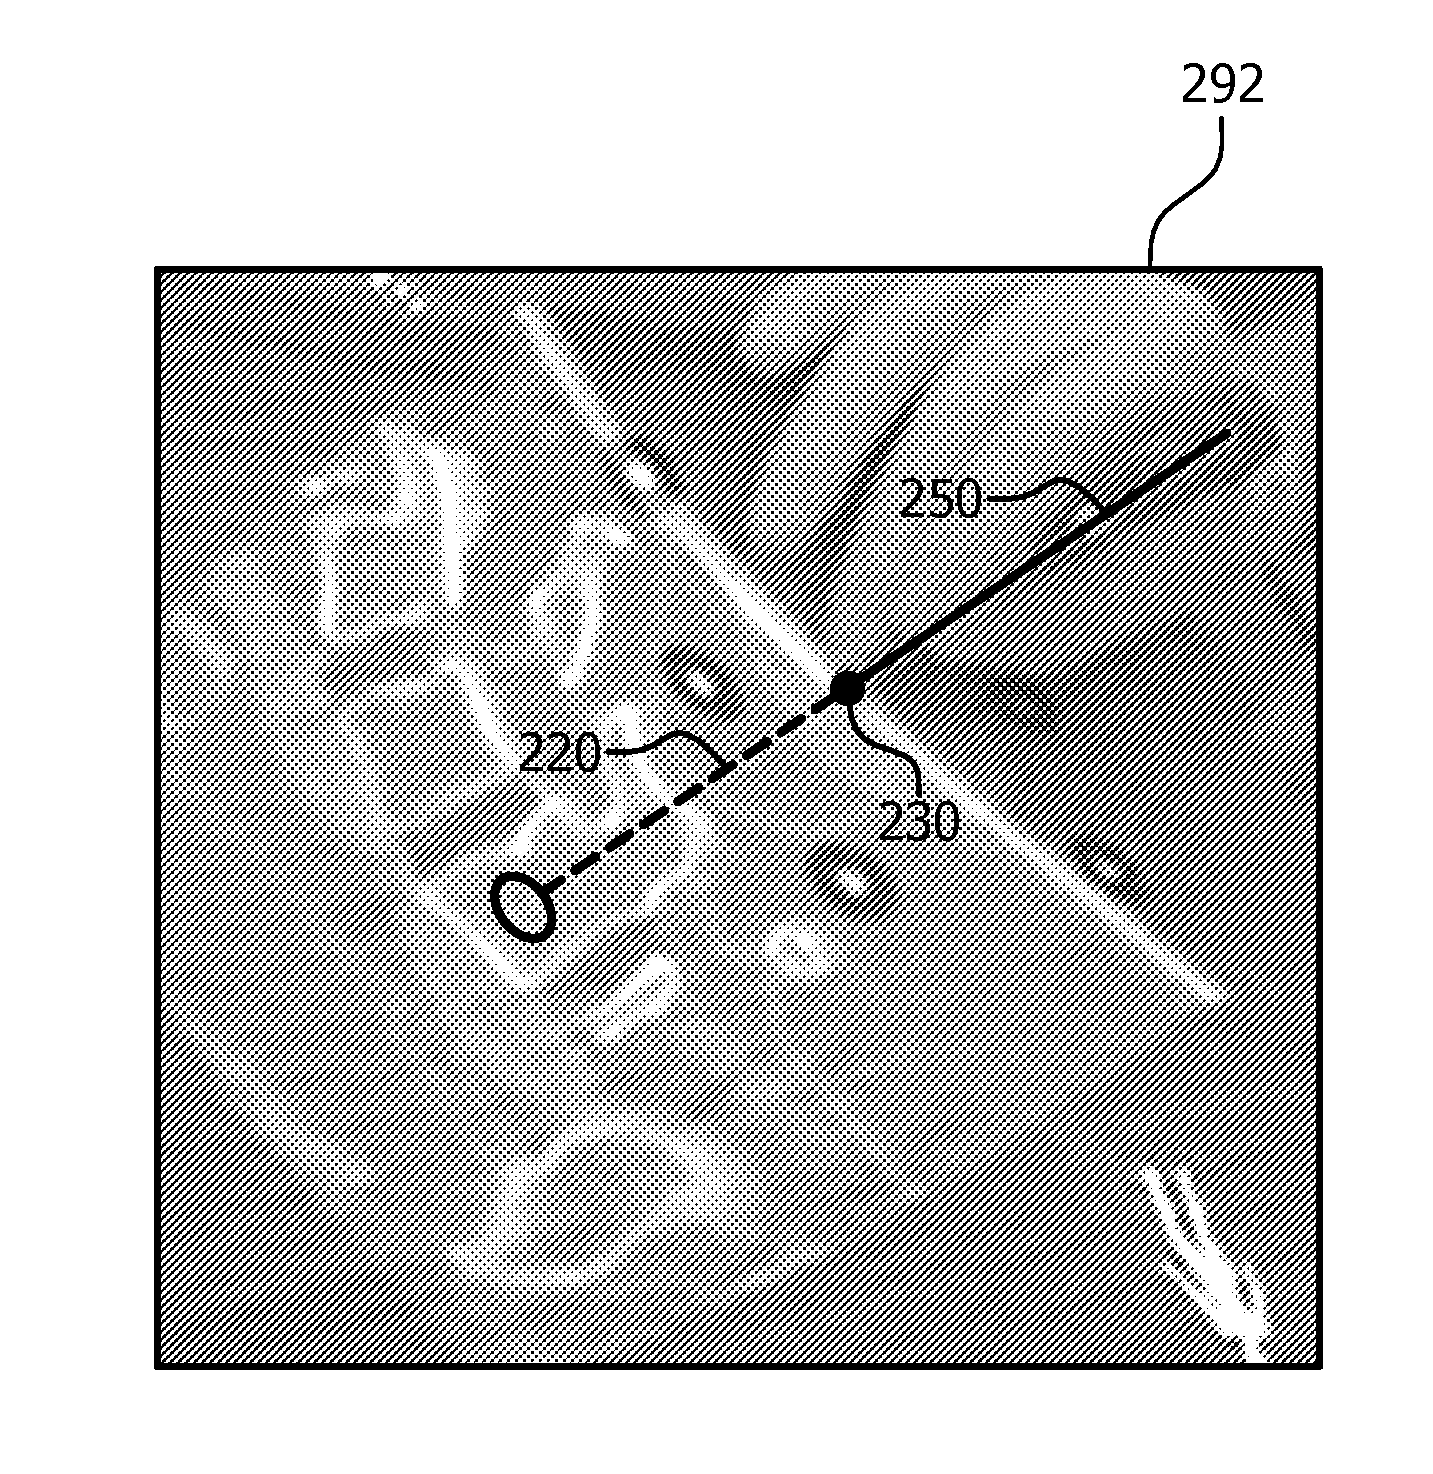 Imaging system and method for enabling instrument guidance